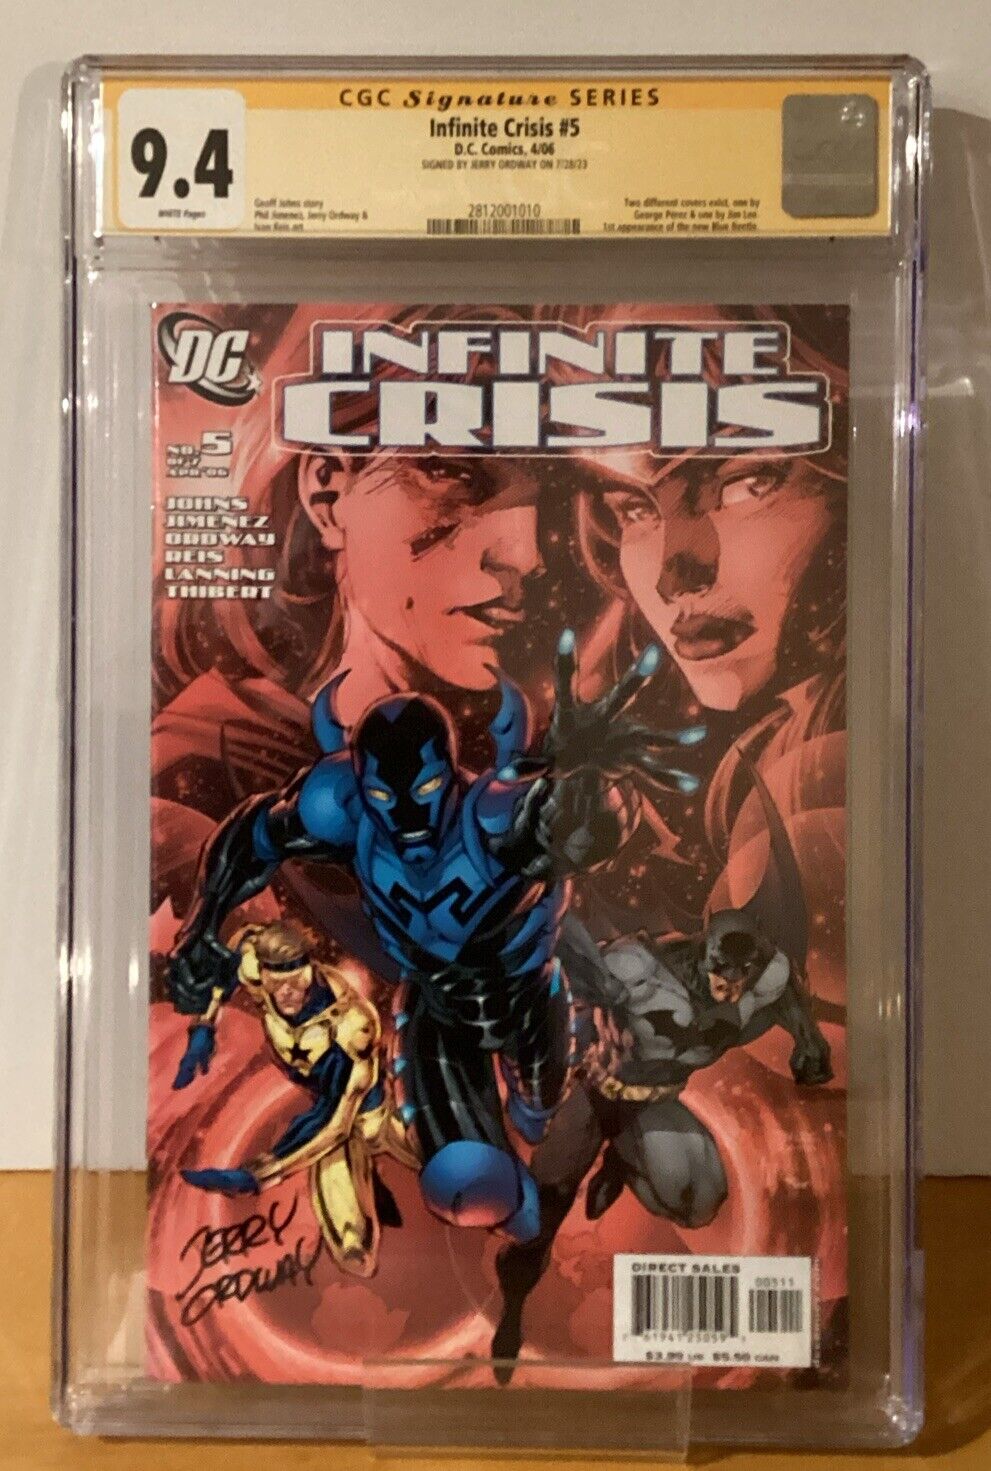 Infinite Crisis #5 CGC 9.4 SS Signed Jerry Ordway 1st Blue Beetle Jaime Reyes